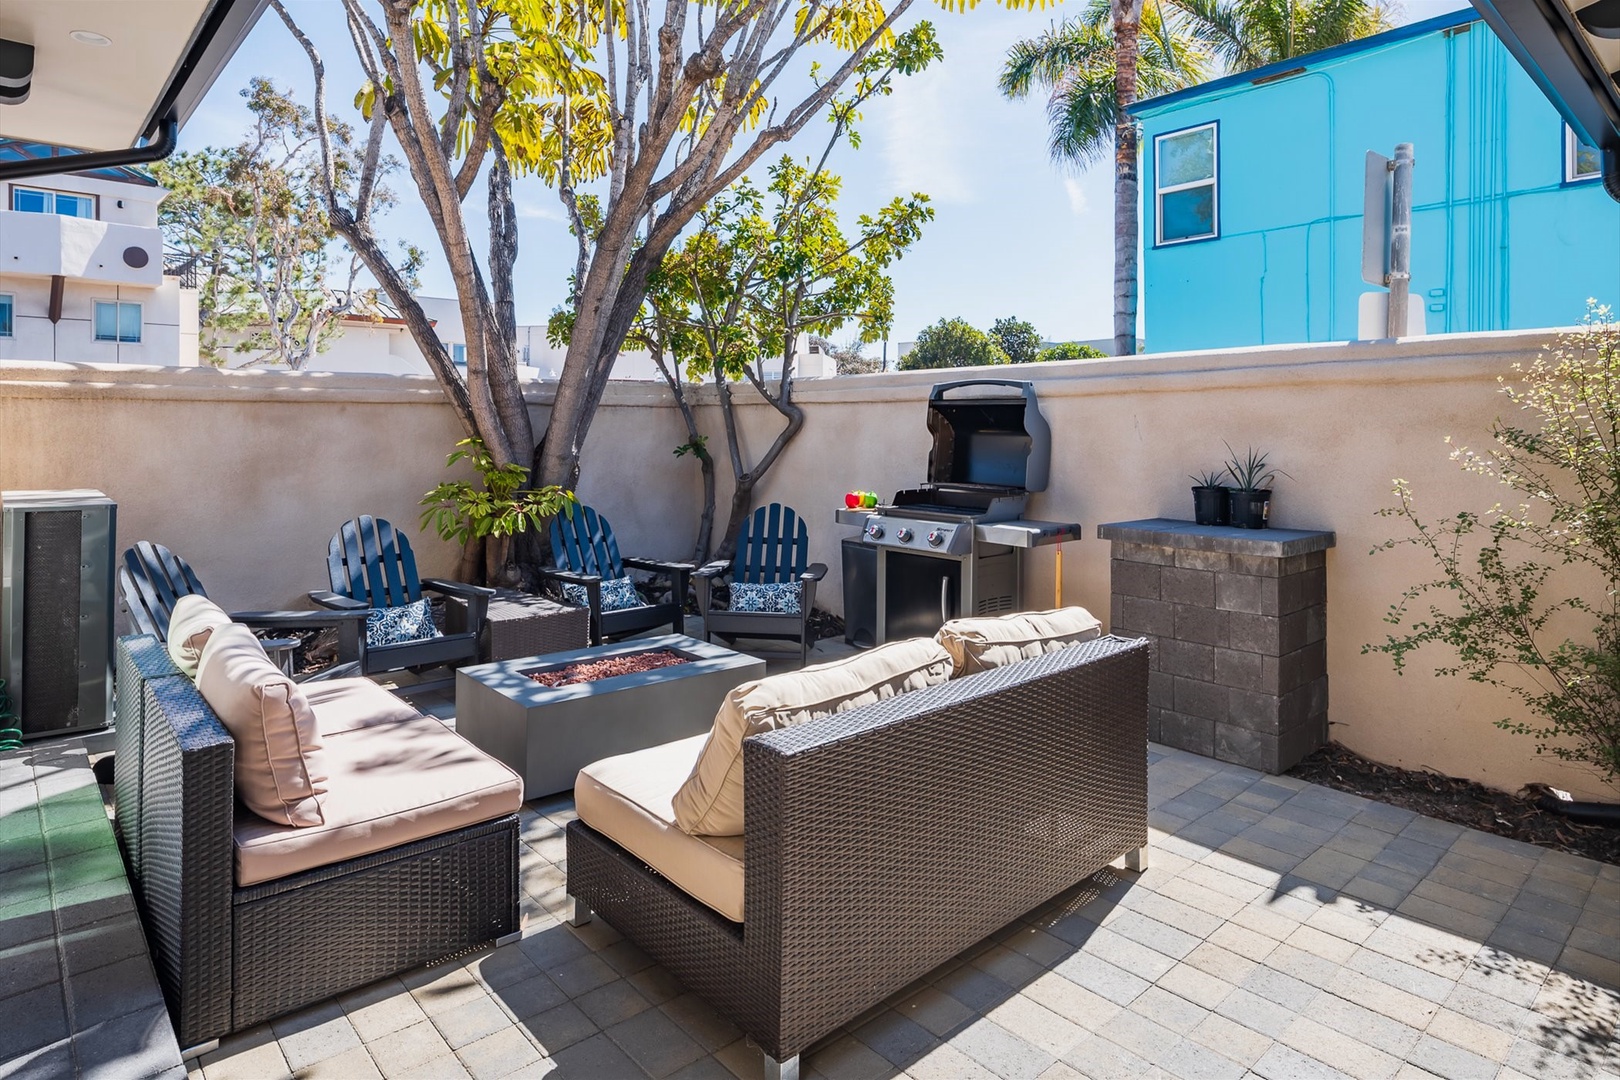 Enclosed courtyard with BBQ